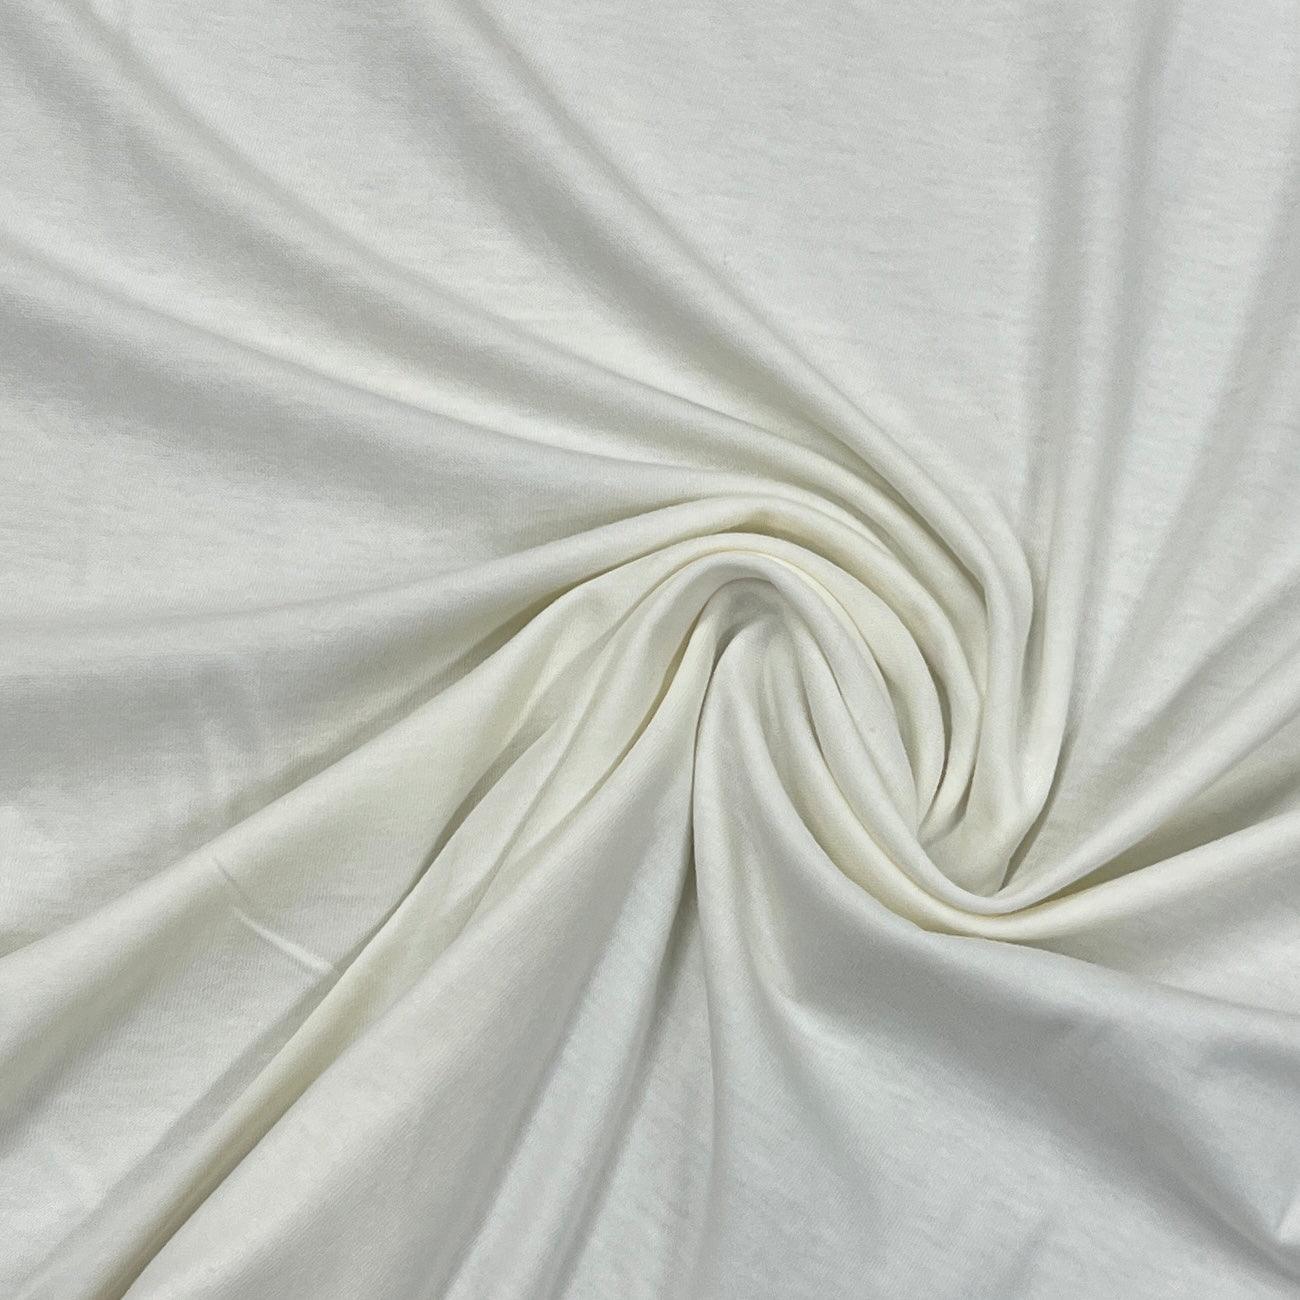 White Solid Cotton Spandex Knit Fabric